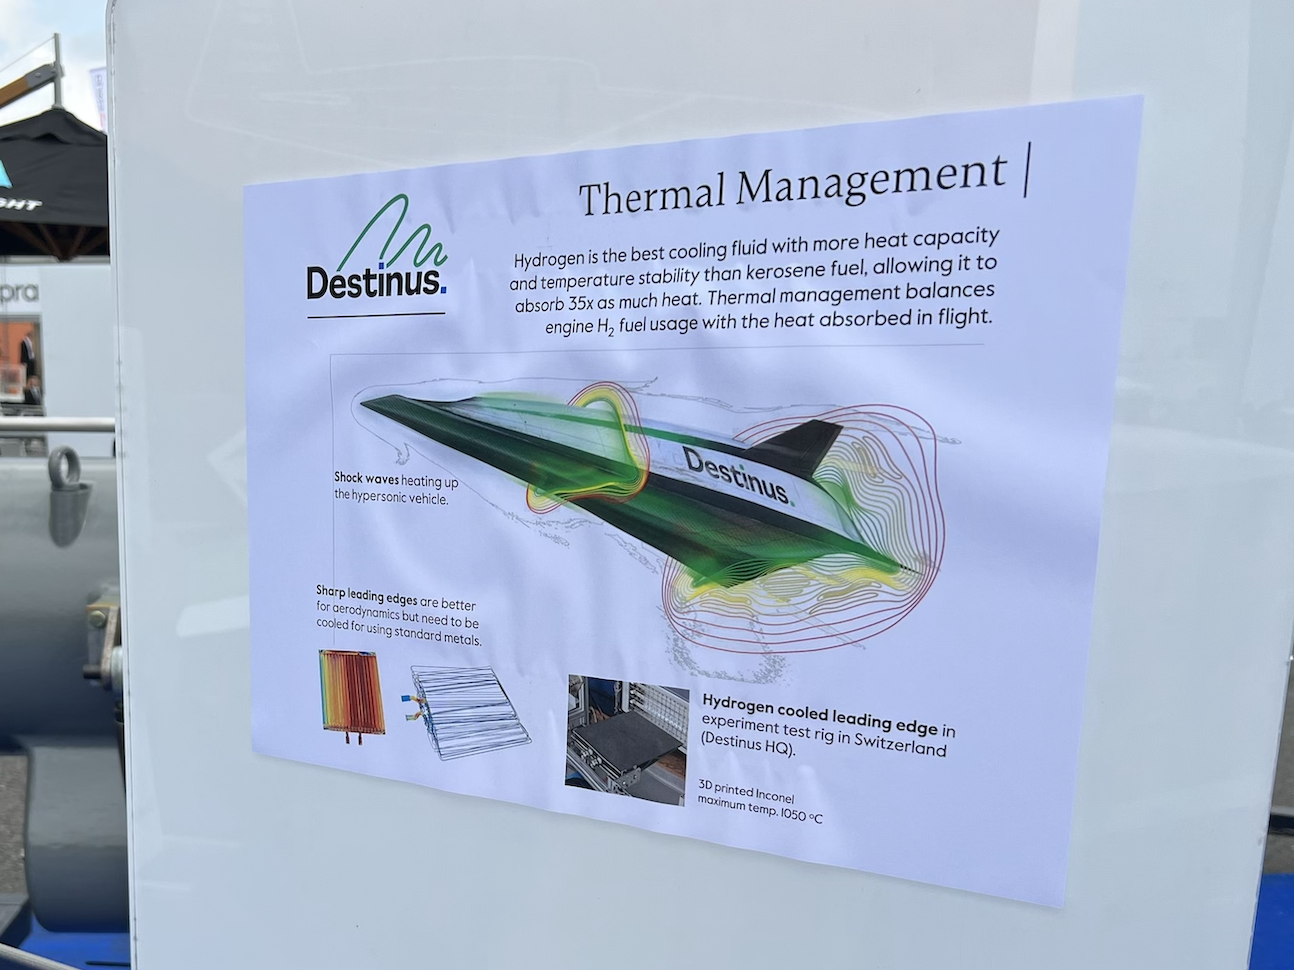 Thermal management explanation card at the Paris Air Show.